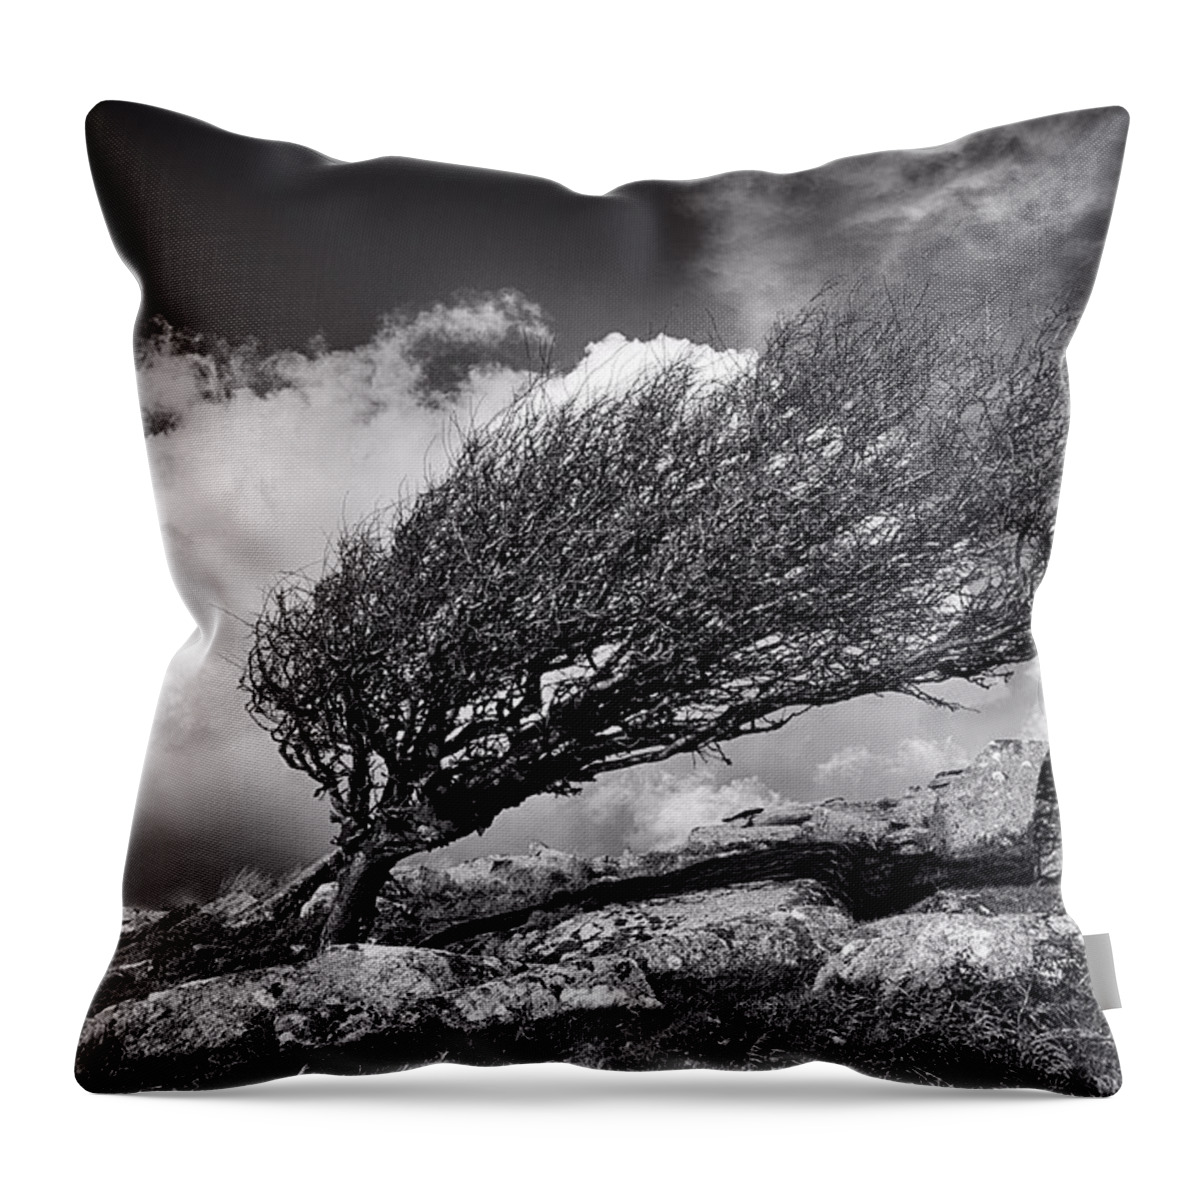 Blasted Heath Throw Pillow featuring the photograph Moorland Tree by Phil Tomlinson